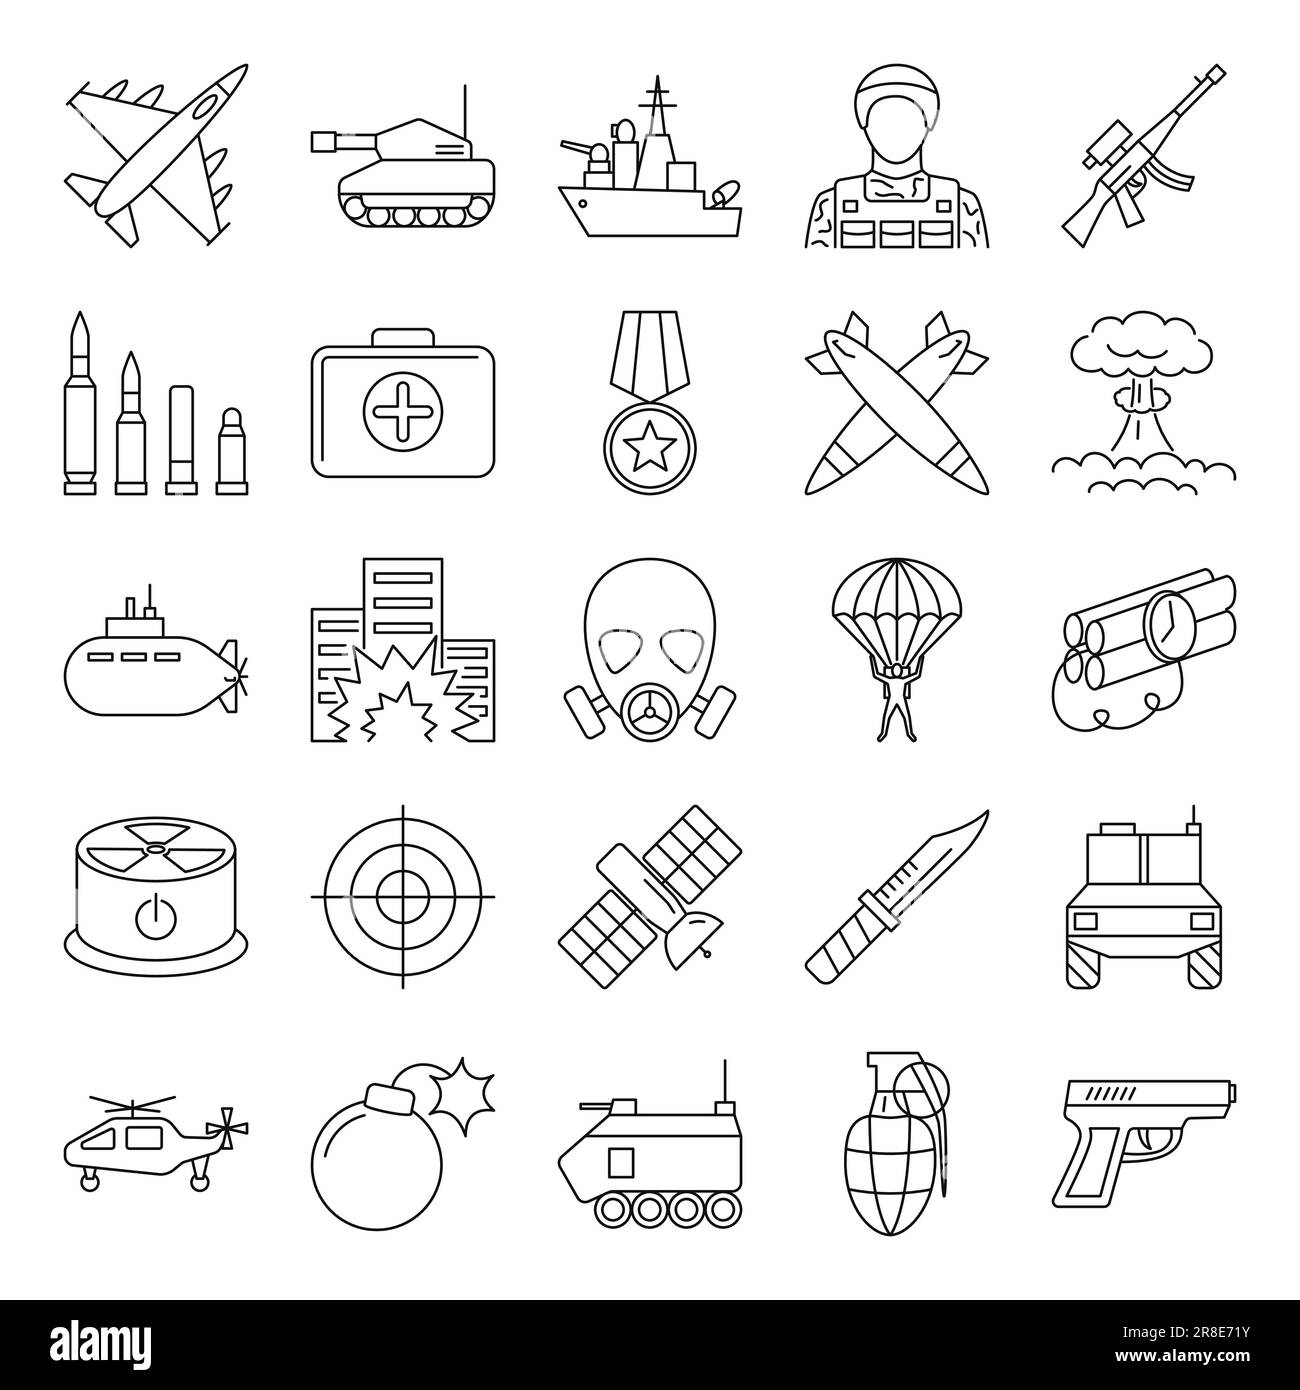 War and military line icon set. Army, transport and weapons symbols. Vector illustration. Stock Vector